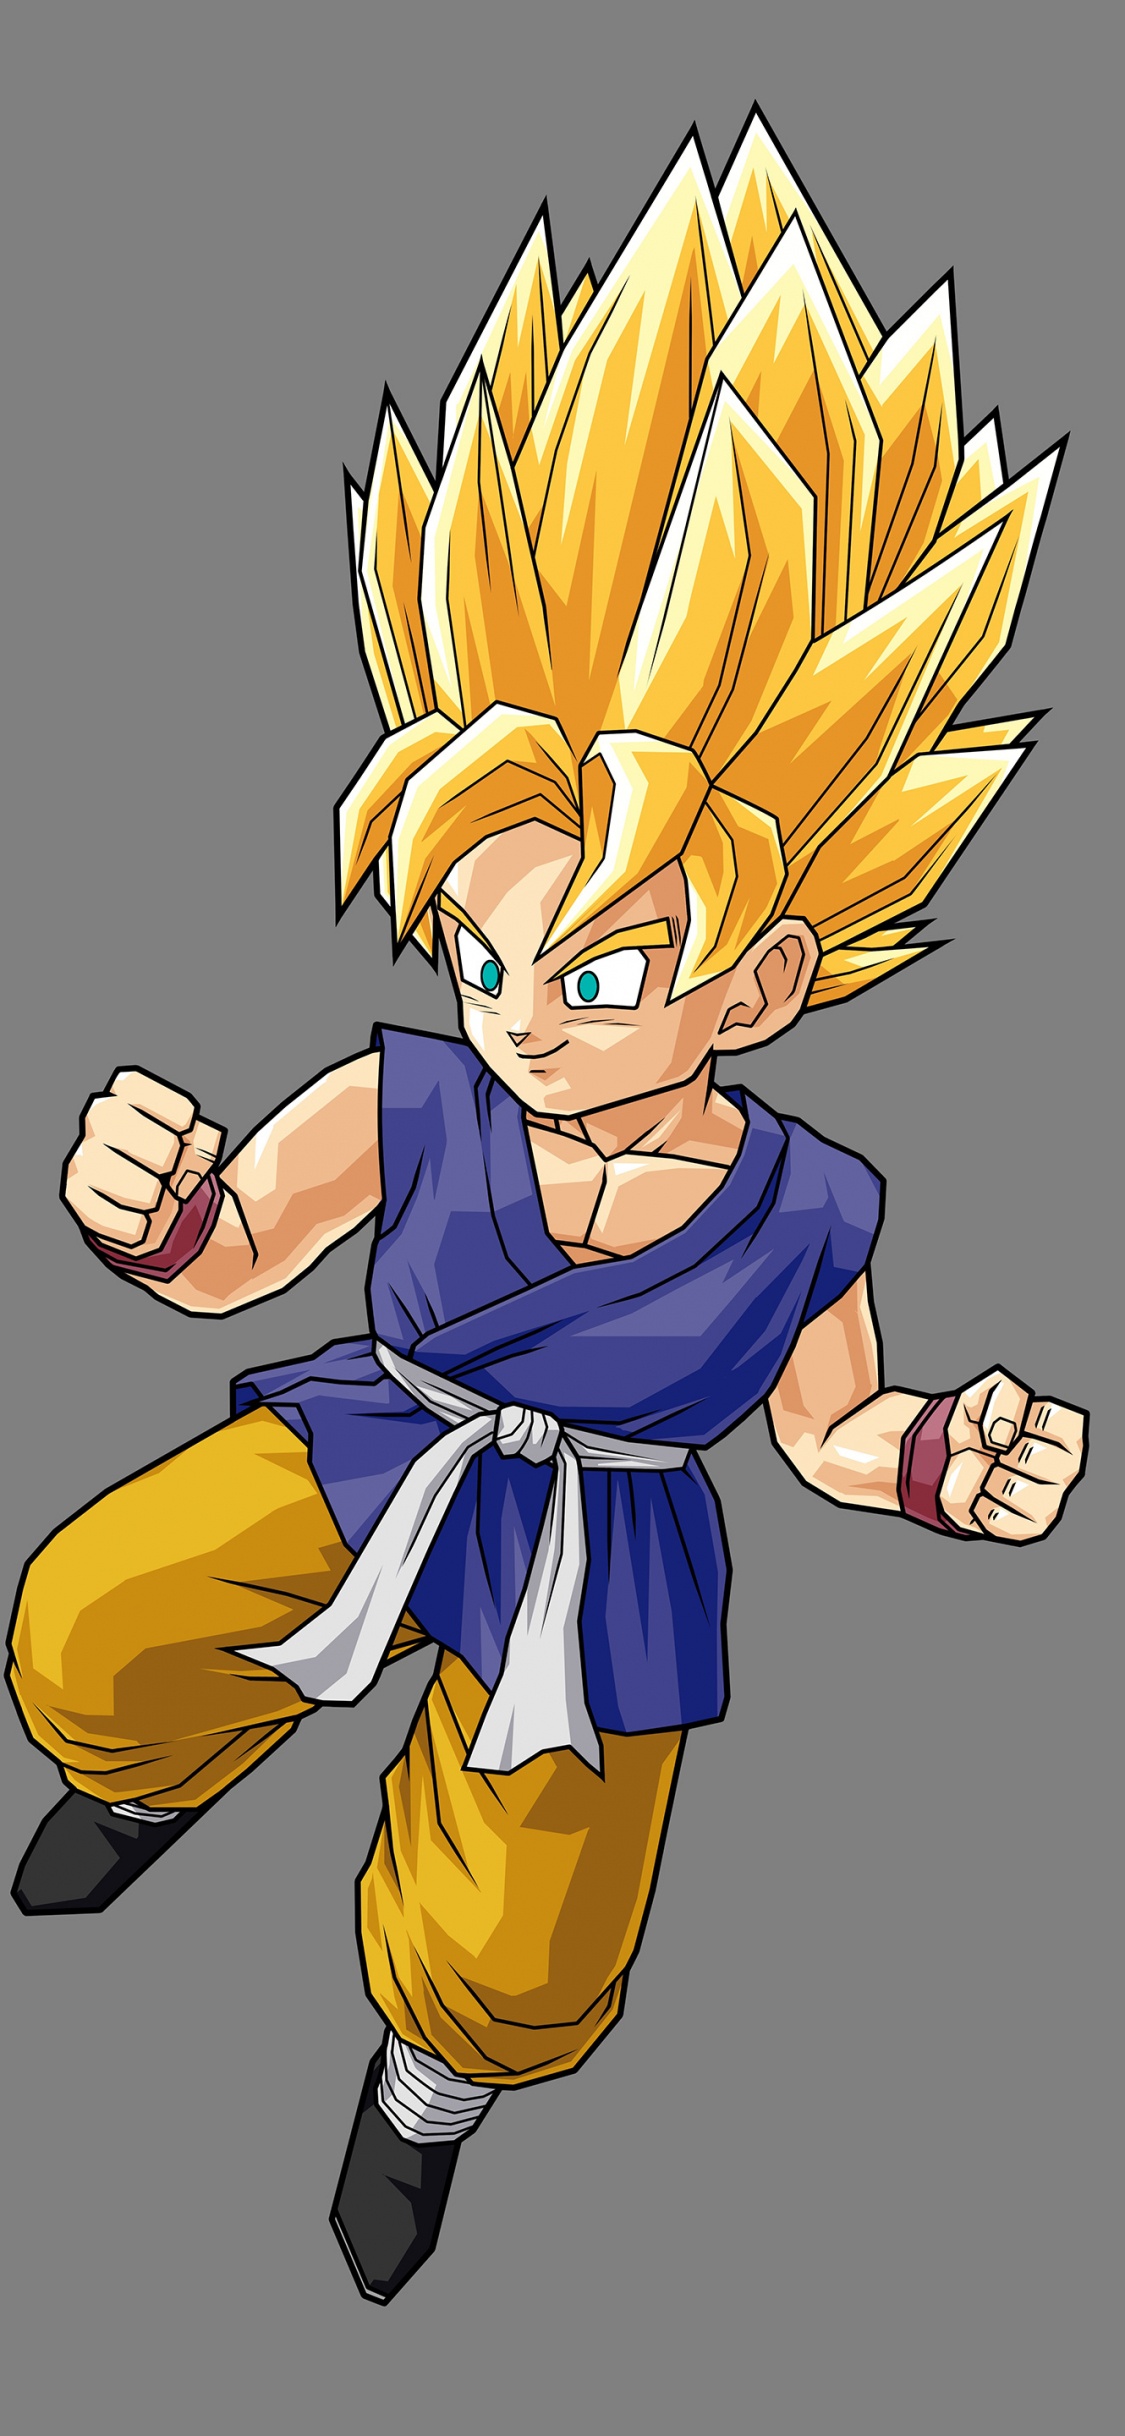 Personnage D'anime Masculin Aux Cheveux Jaunes. Wallpaper in 1125x2436 Resolution